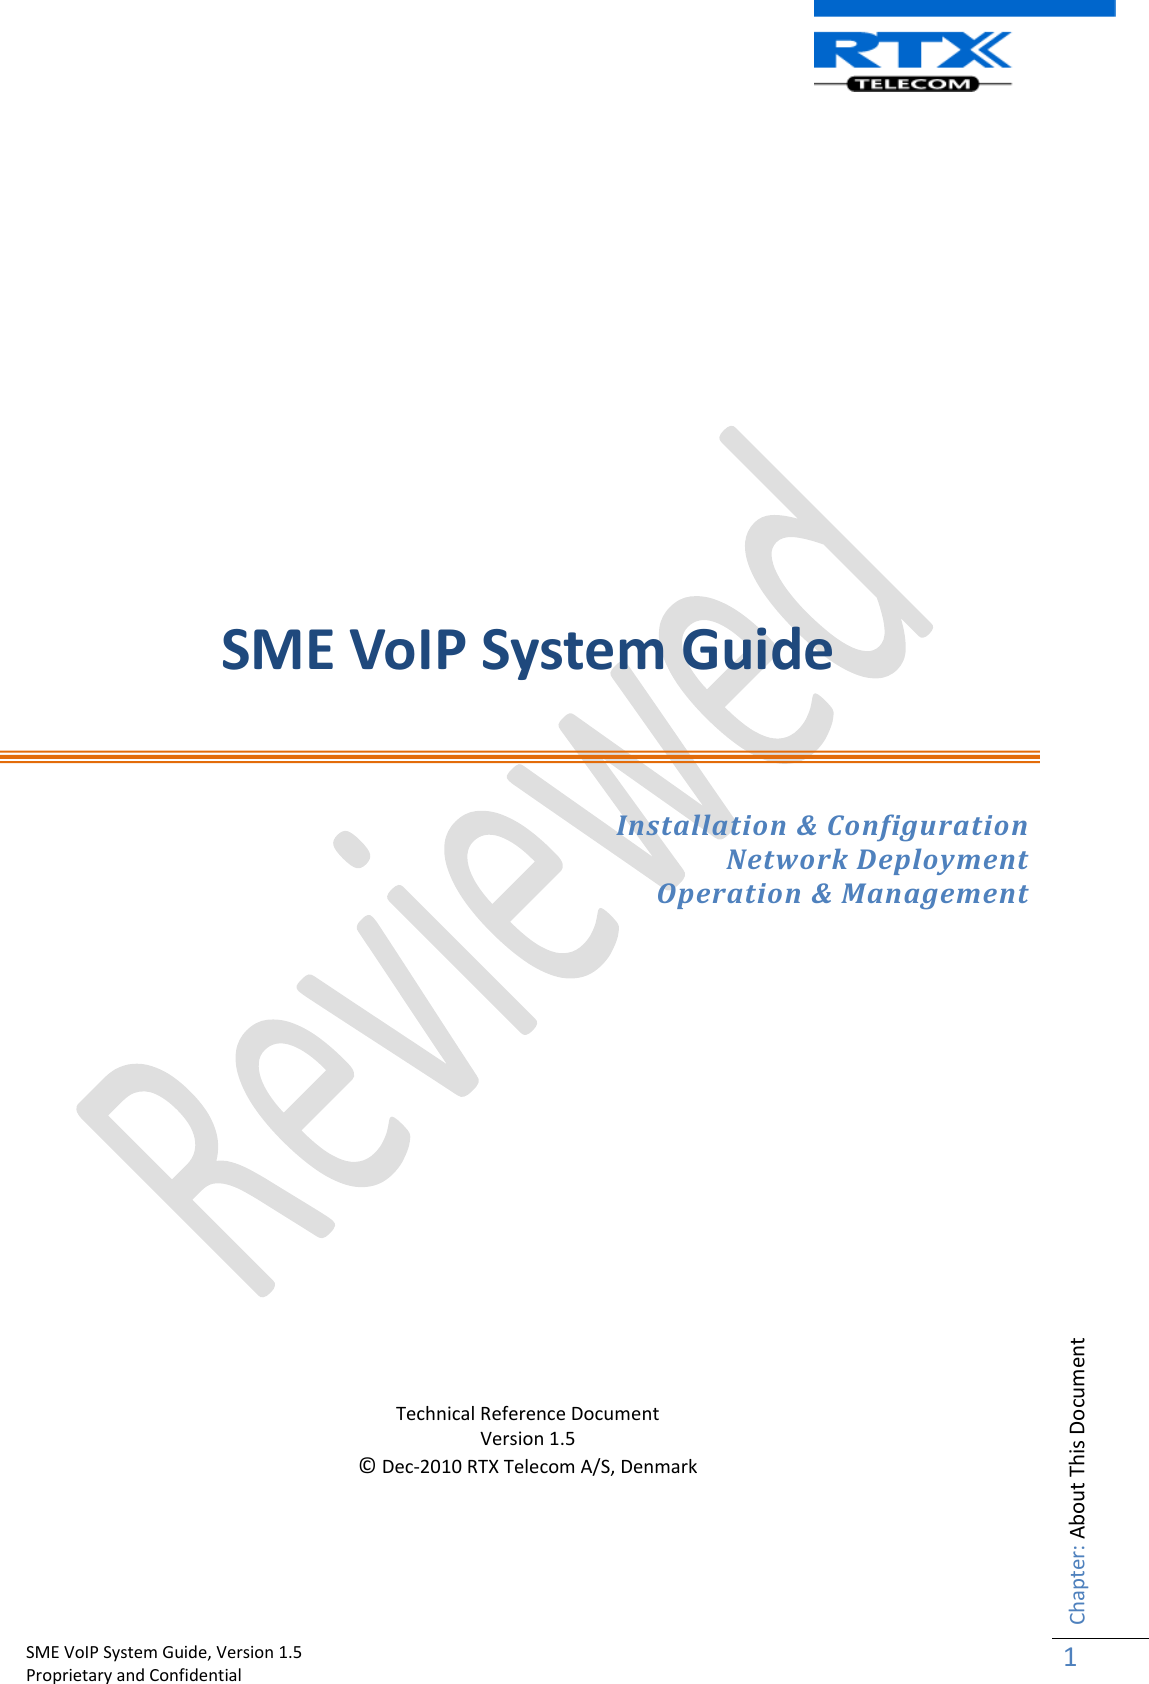    SME VoIP System Guide, Version 1.5                                                                                                                                                          Proprietary and Confidential    Chapter: About This Document 1         SME VoIP System Guide  Installation &amp; Configuration Network Deployment Operation &amp; Management        Technical Reference Document Version 1.5 © Dec-2010 RTX Telecom A/S, Denmark     